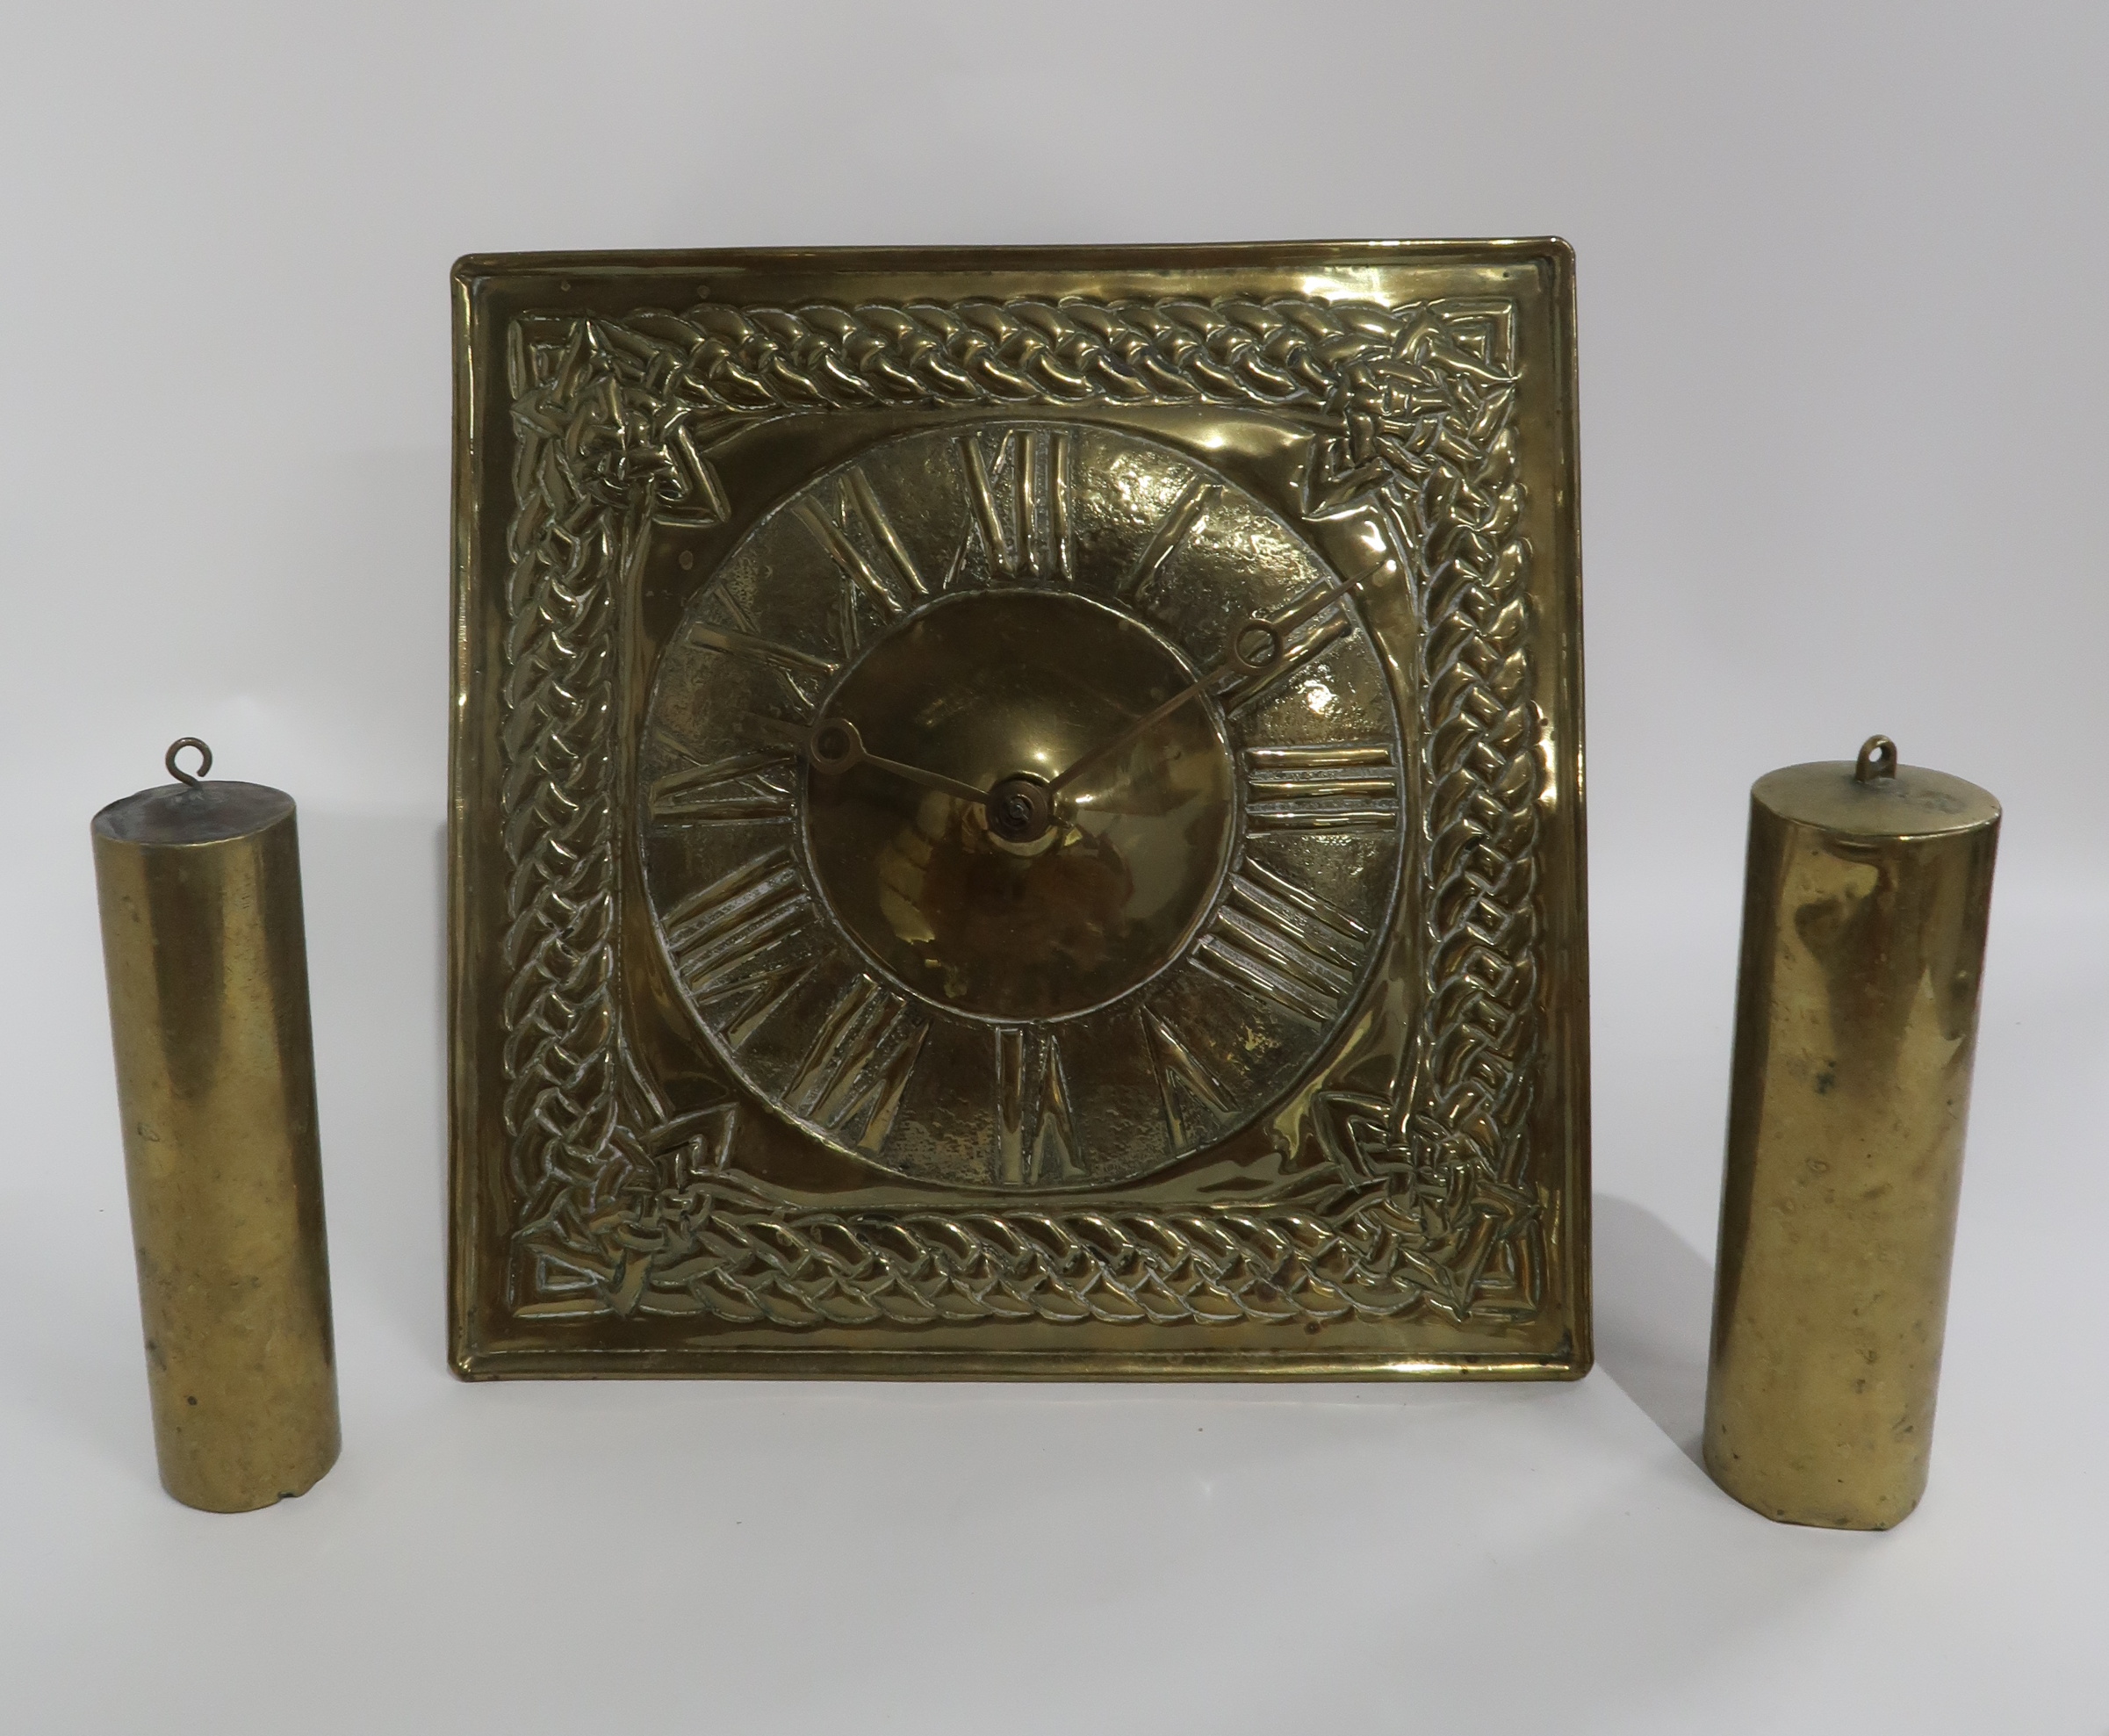 A BRASS ARTS AND CRAFTS WAG AT THE WA CLOCK with Celtic knotwork design, pendulum and weights